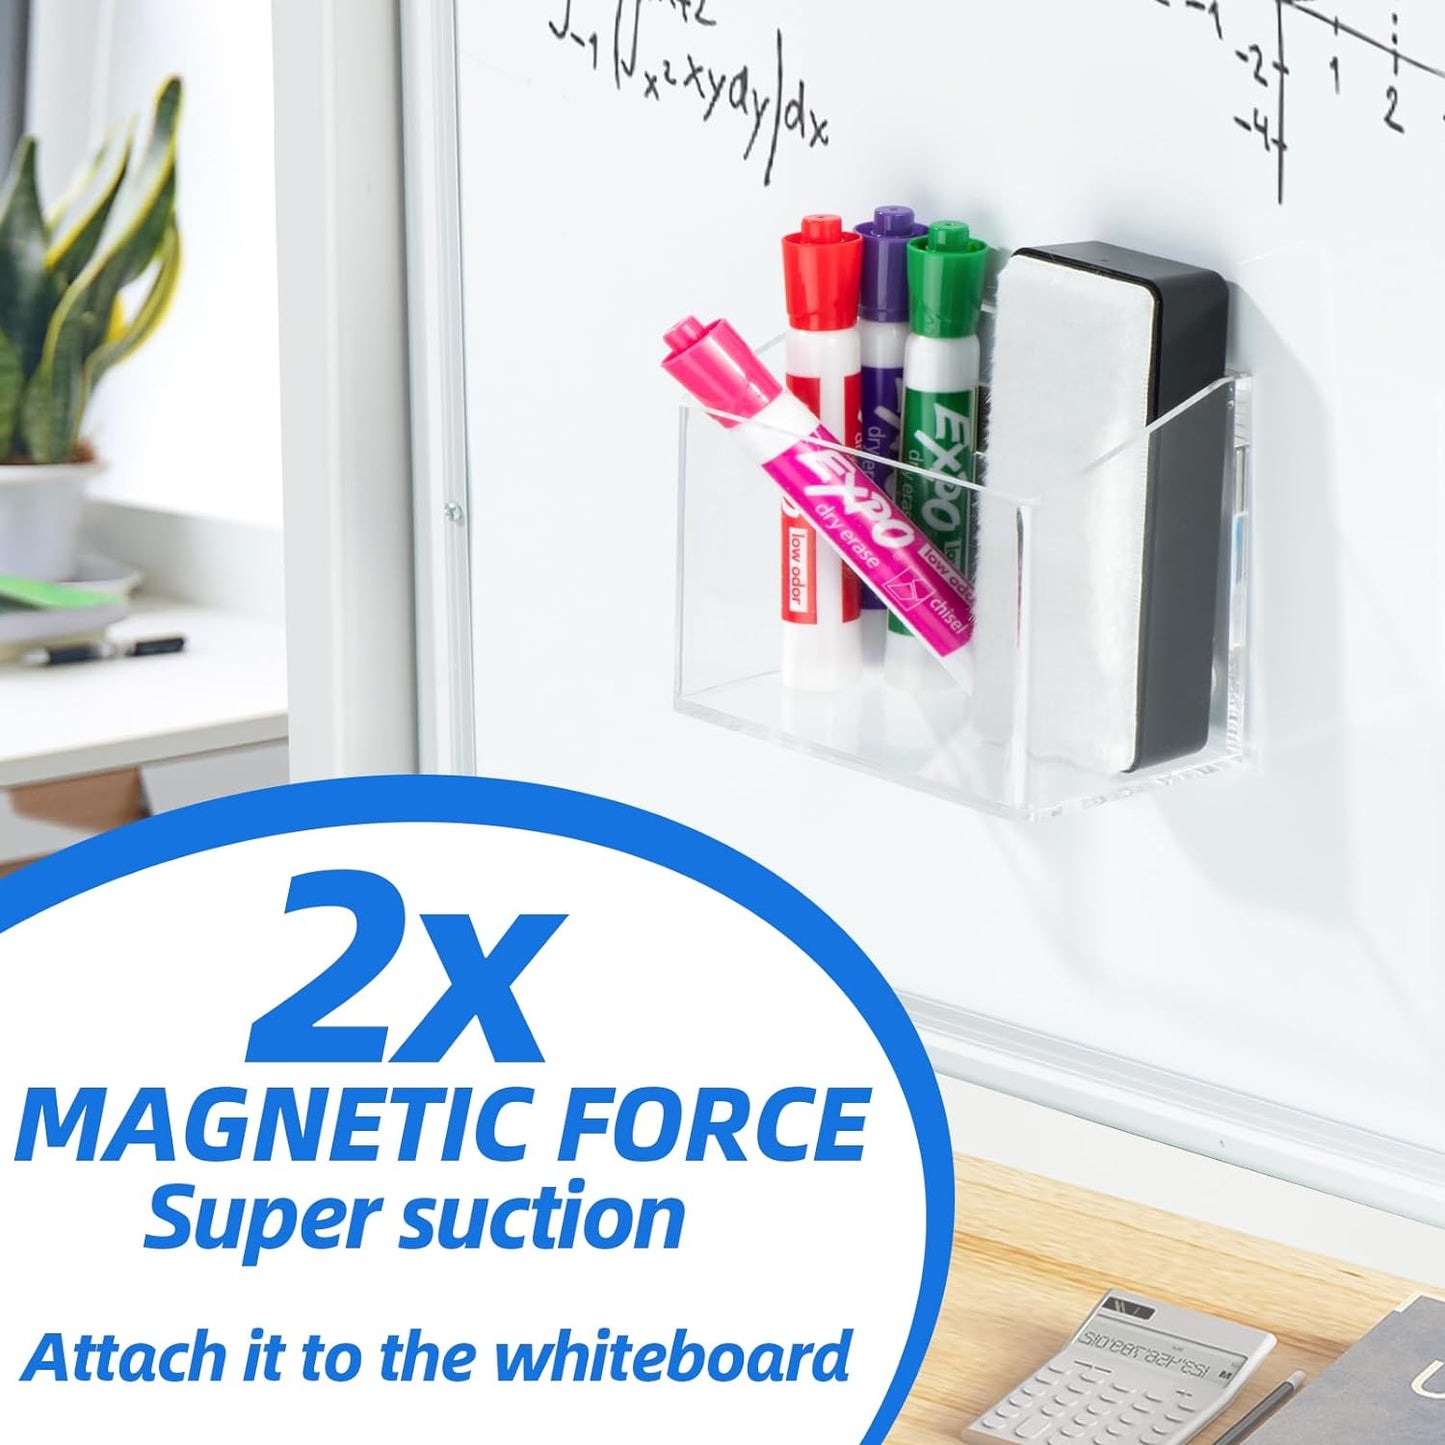 Magnetic Glass Whiteboard Accessory Holder for Markers, Pens, Pencils - Fridge, Lockers, Whiteboards - Transparent, 1 Pack